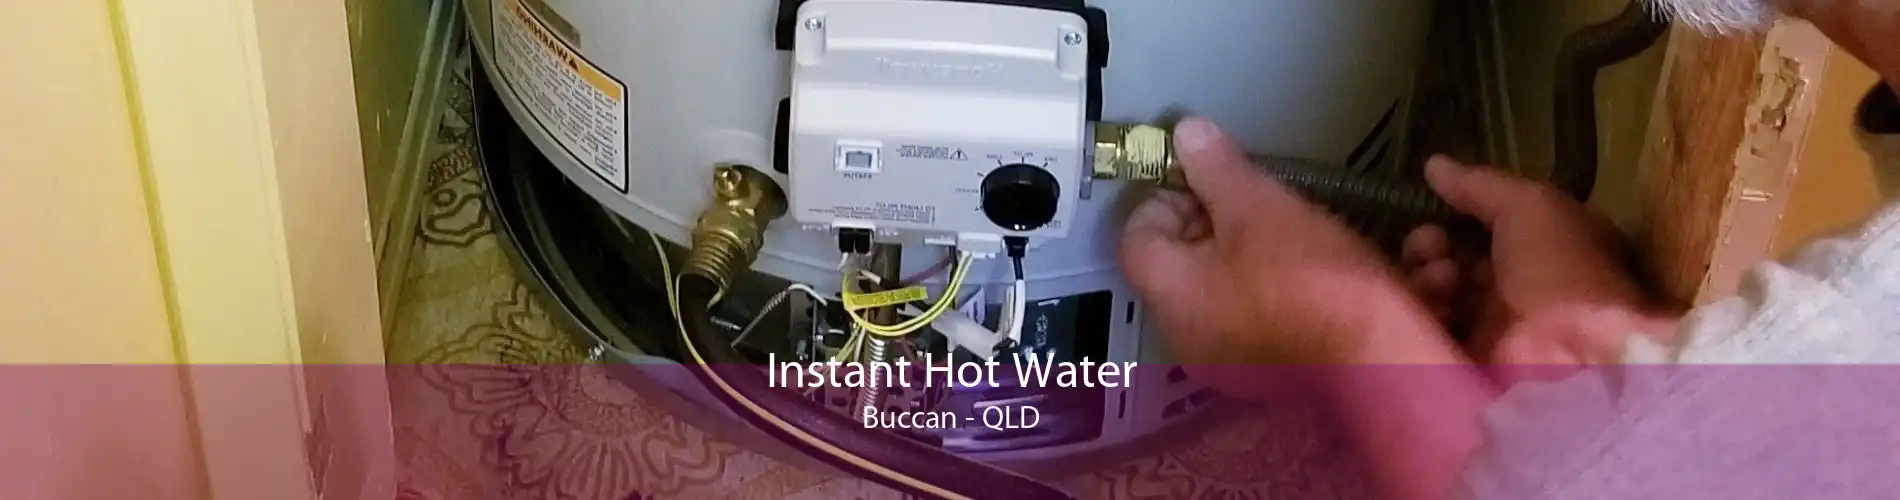 Instant Hot Water Buccan - QLD